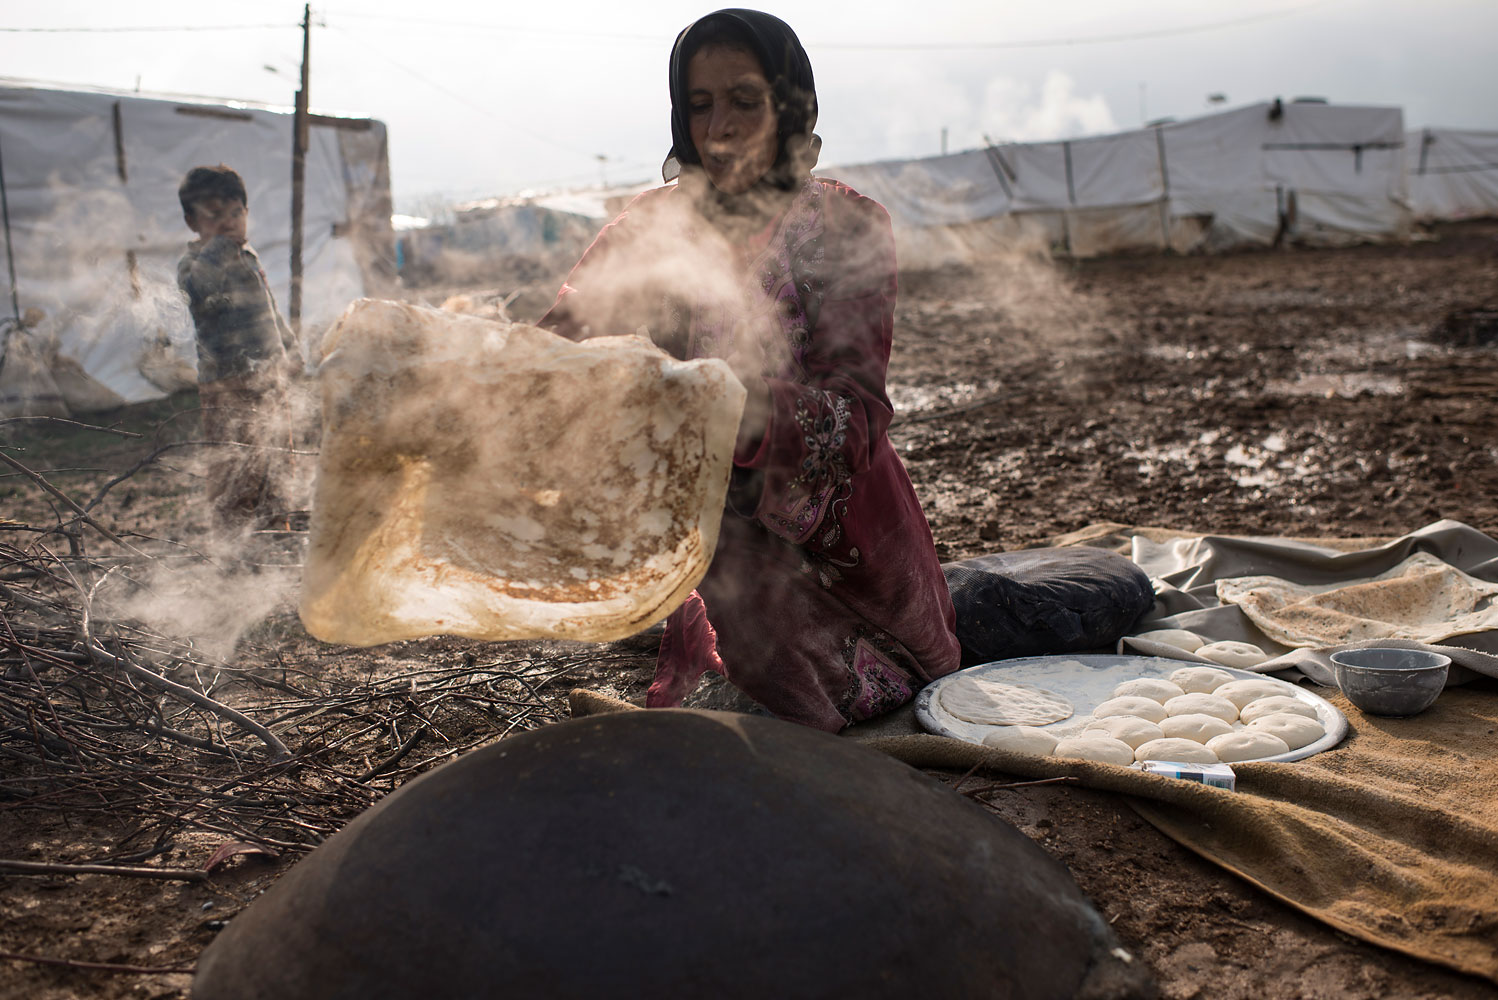 Nafat, 45, from Homs, bakes bread outside her shelter in Turbide, Bekaa Valley. She has been in Lebanon for more than a year, and feeds her family of 13 every morning. “The bakery is too expensive,” she says. “I learned to bake by watching my neighbours."